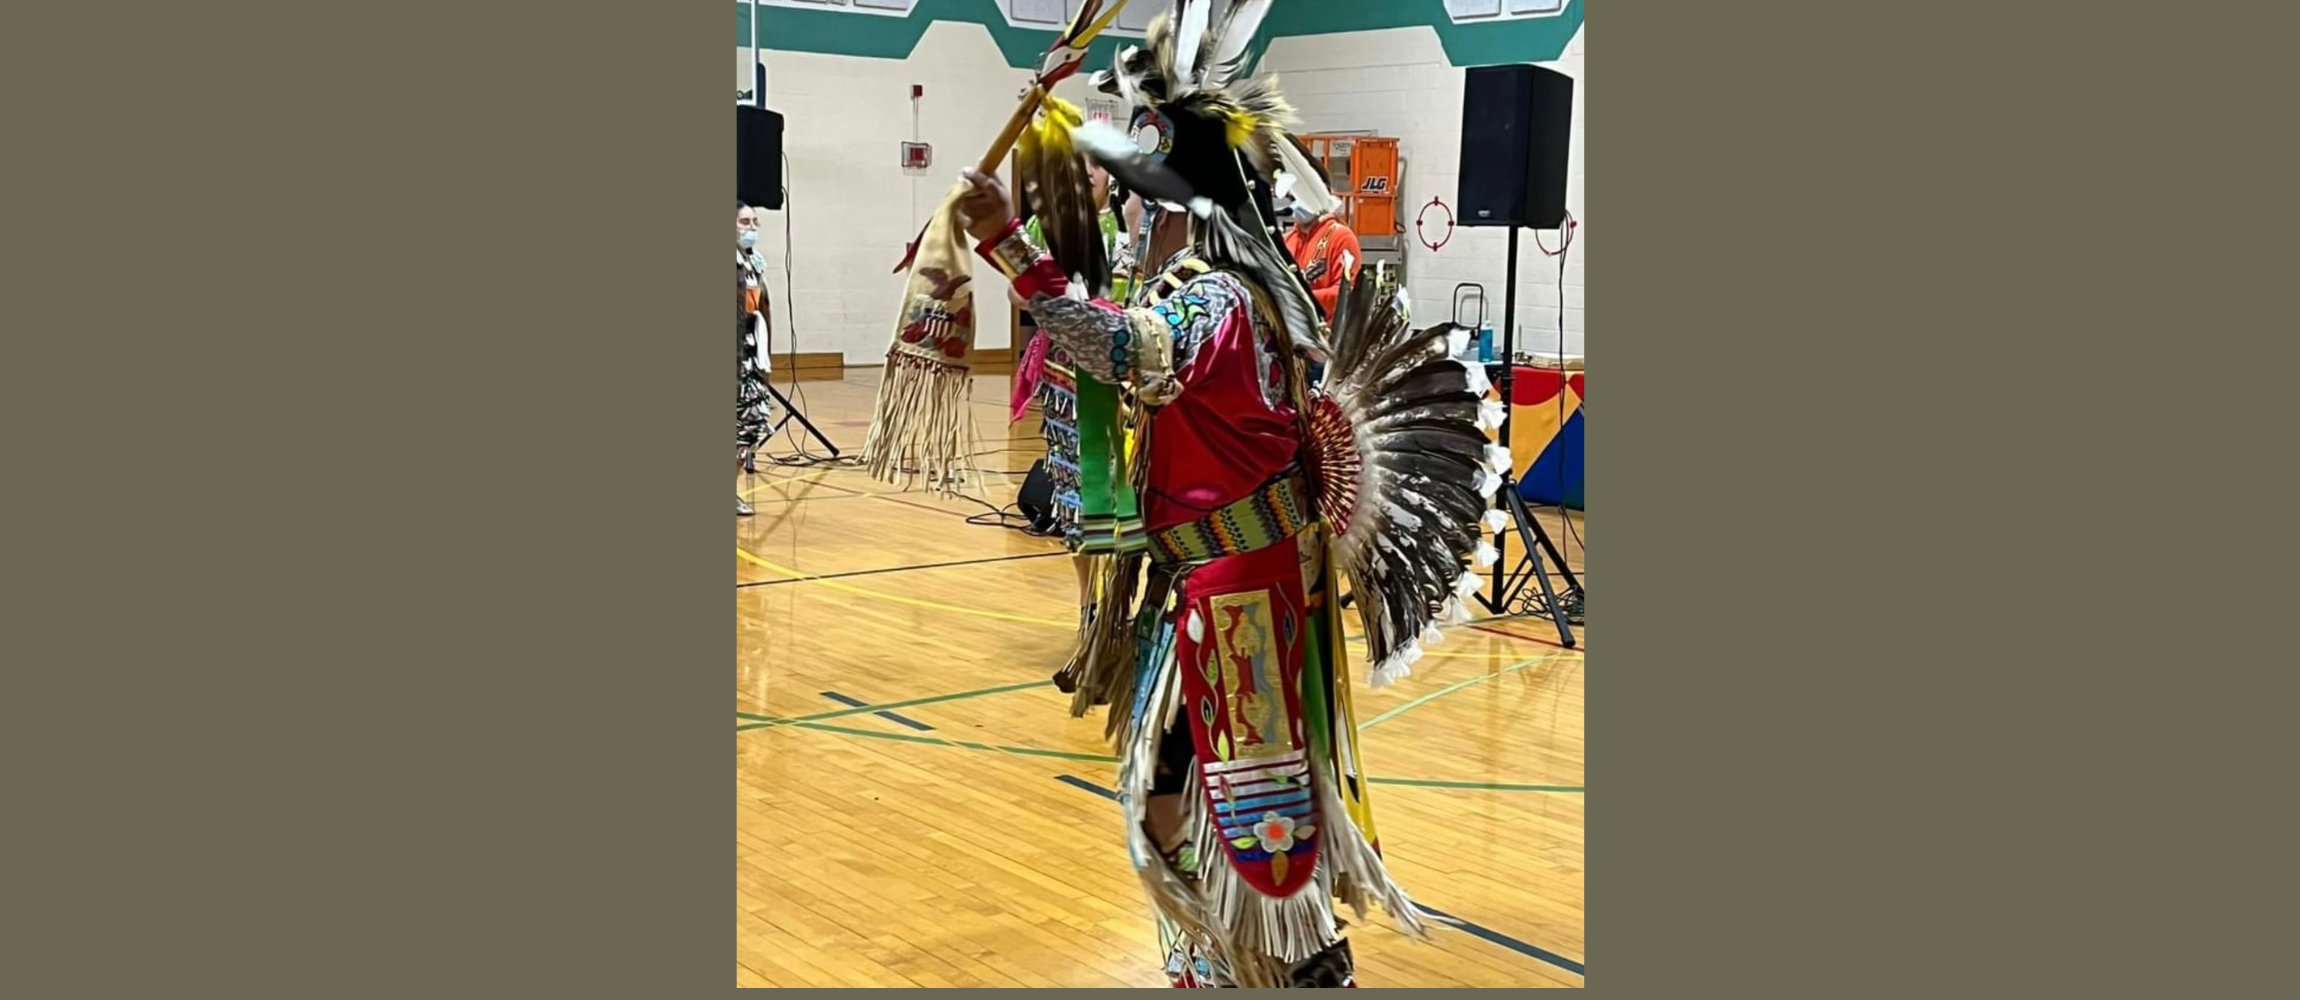 Native American Dancer in the Pullen Gym. 